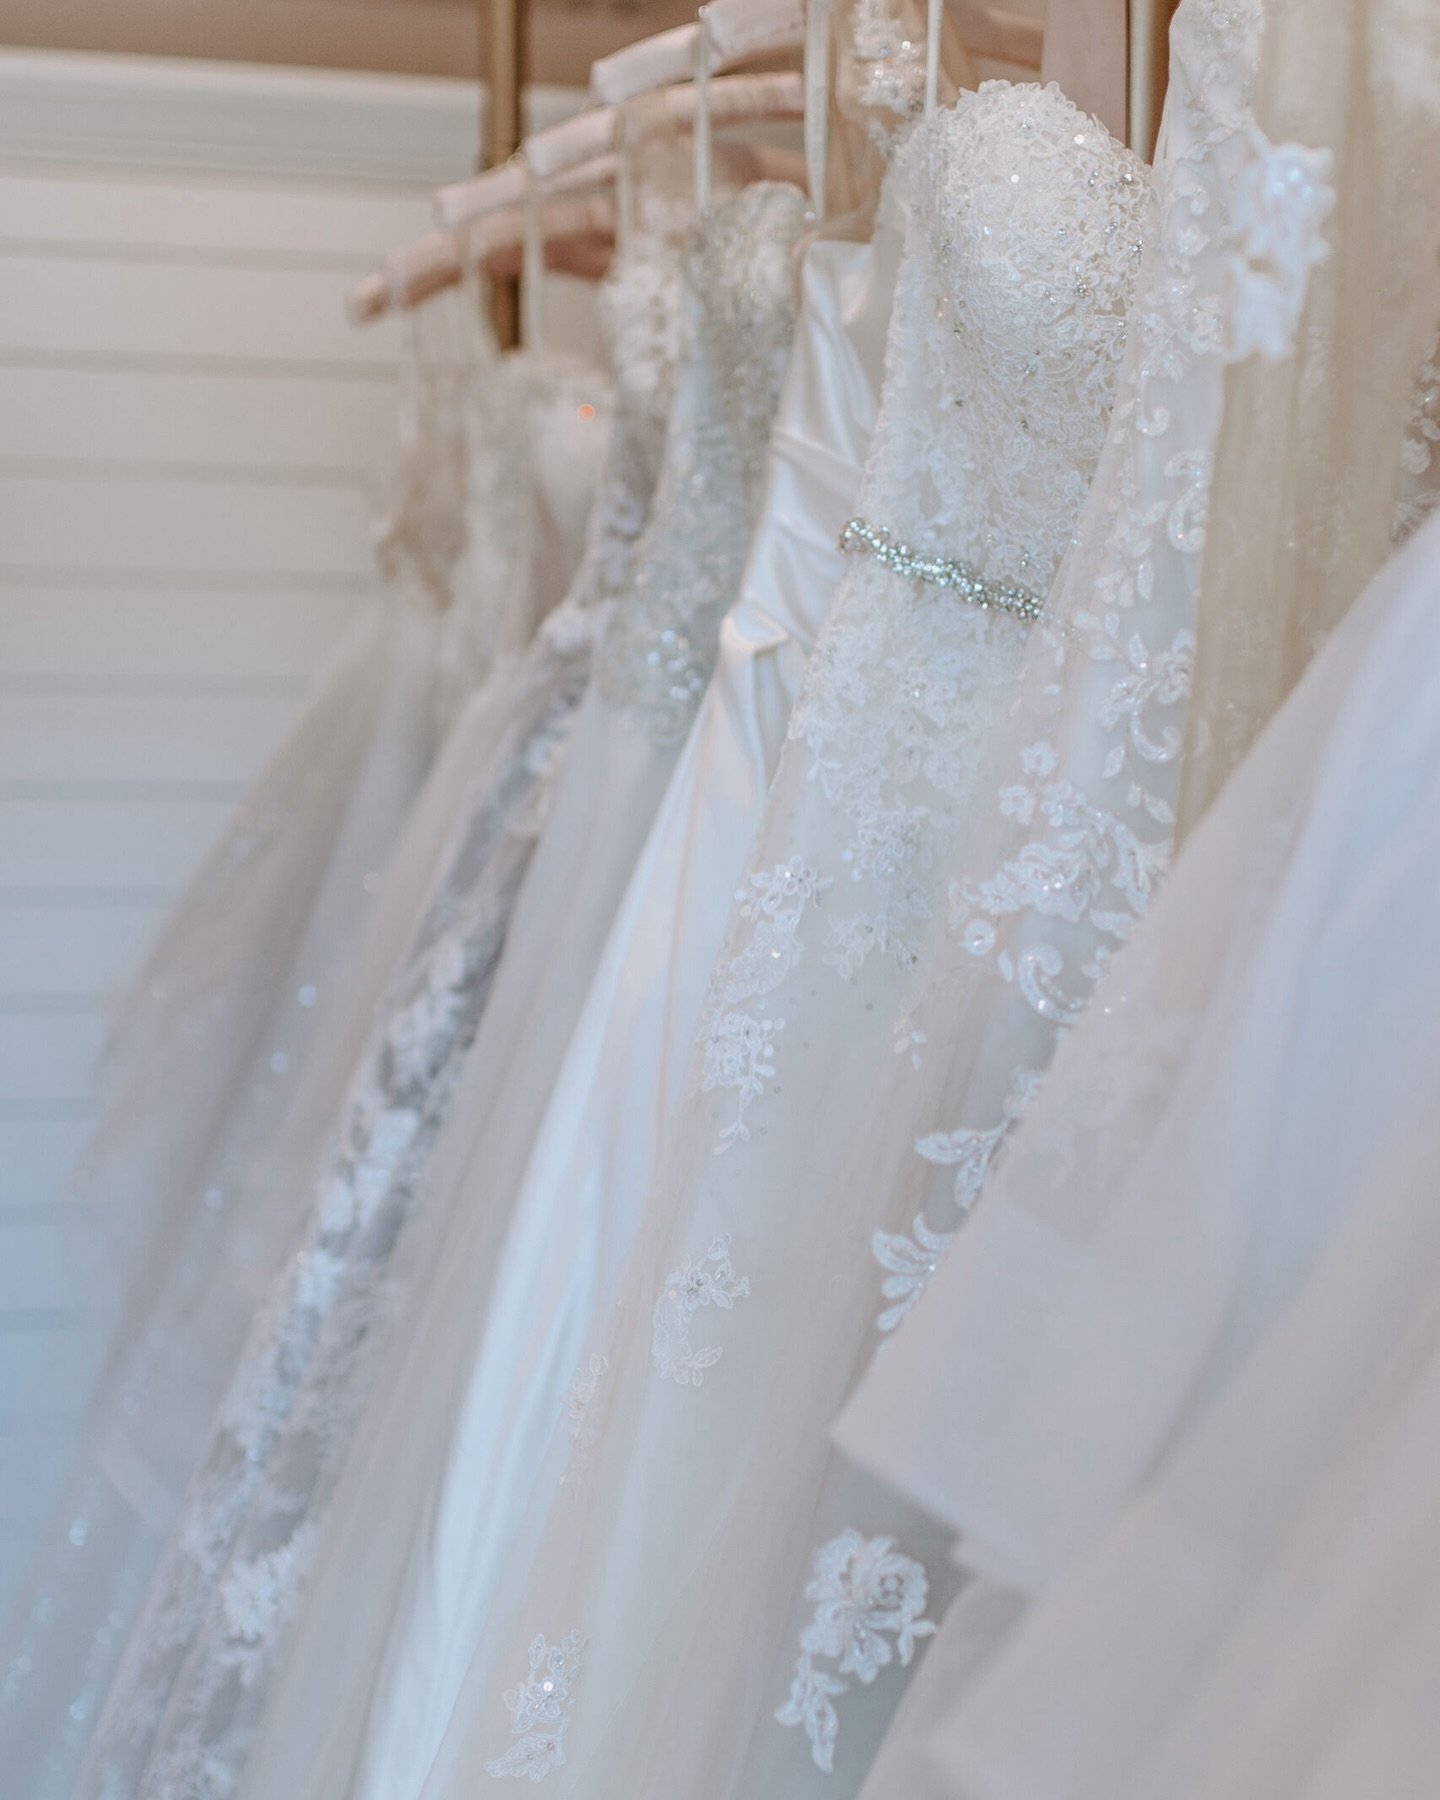 Wedding dress shopping ✨tip of the day✨. 

Dresses aren&rsquo;t always what they seem hanging on the rack. While you might not love a dress while it&rsquo;s sitting stagnant, it could just be the one you say yes to! We always suggest listening to you